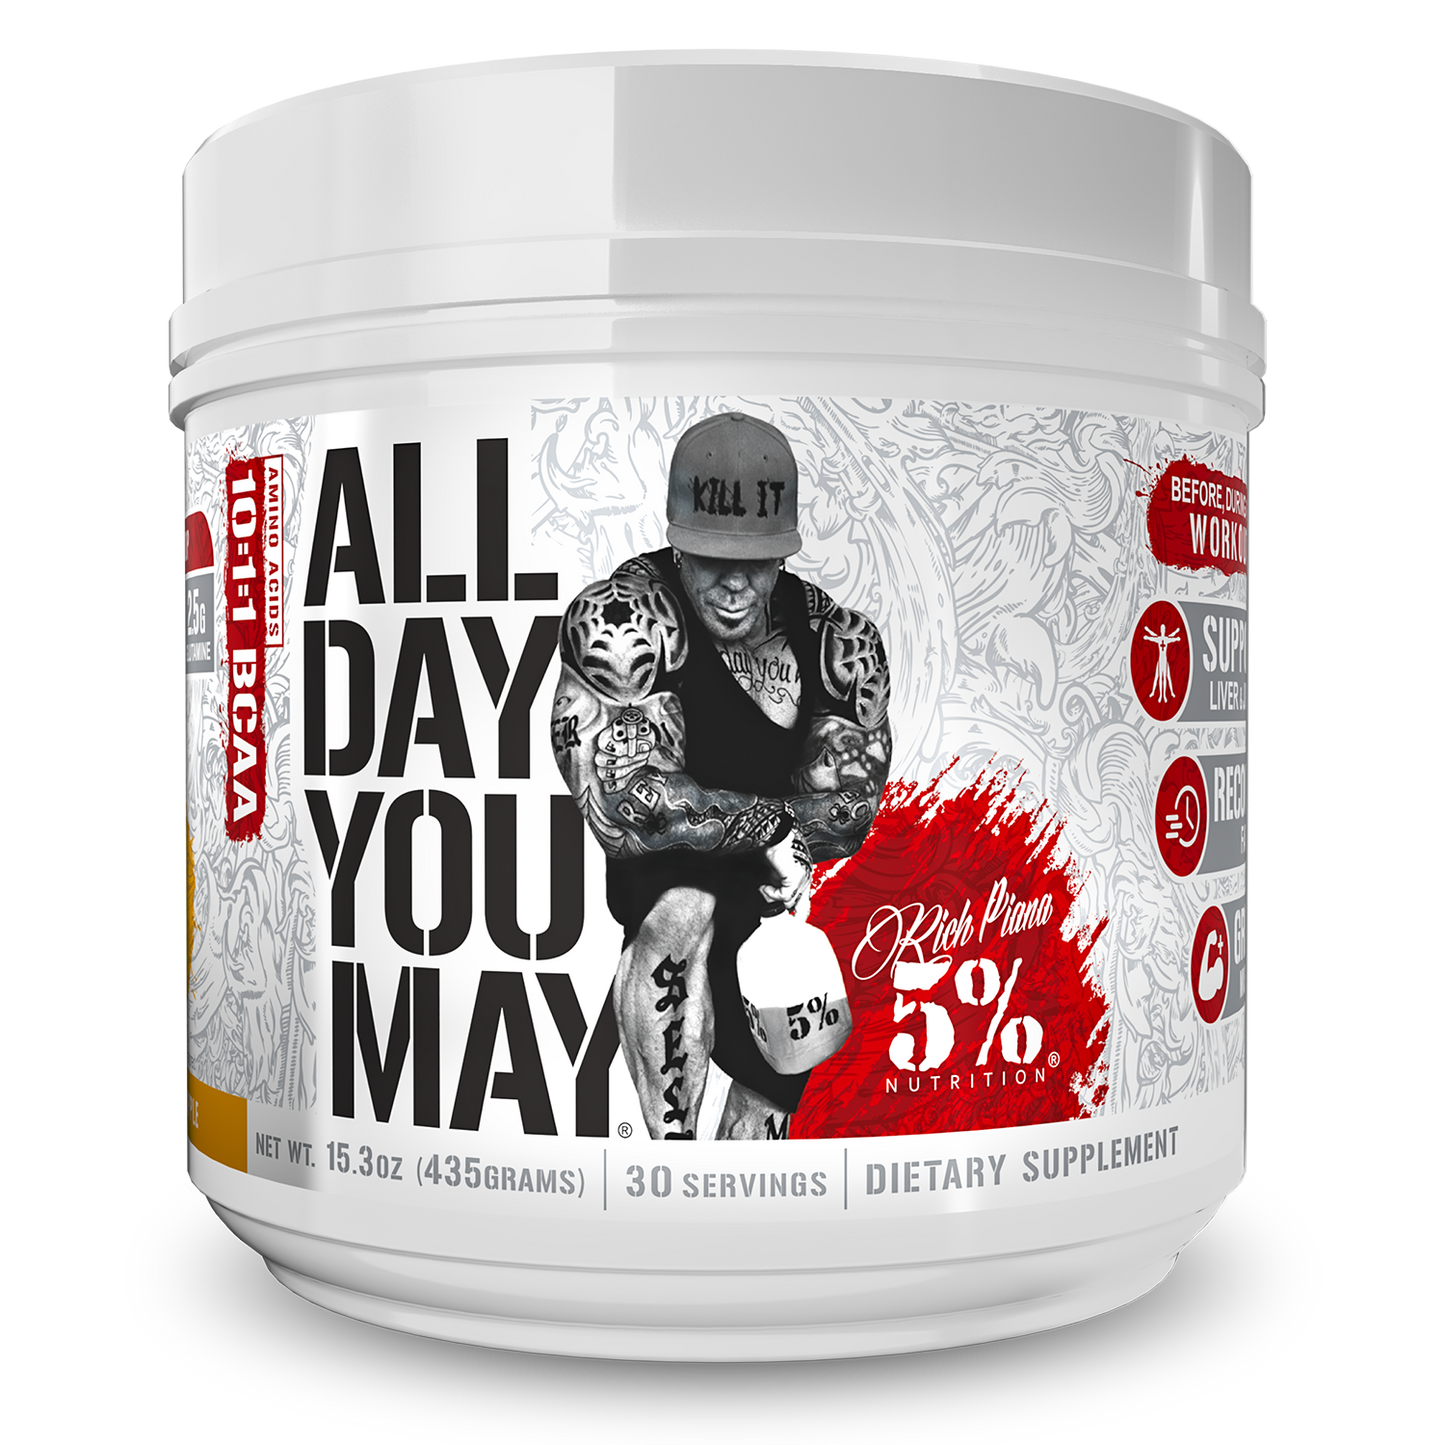 5% Nutrition All Day You May (30 Servings)